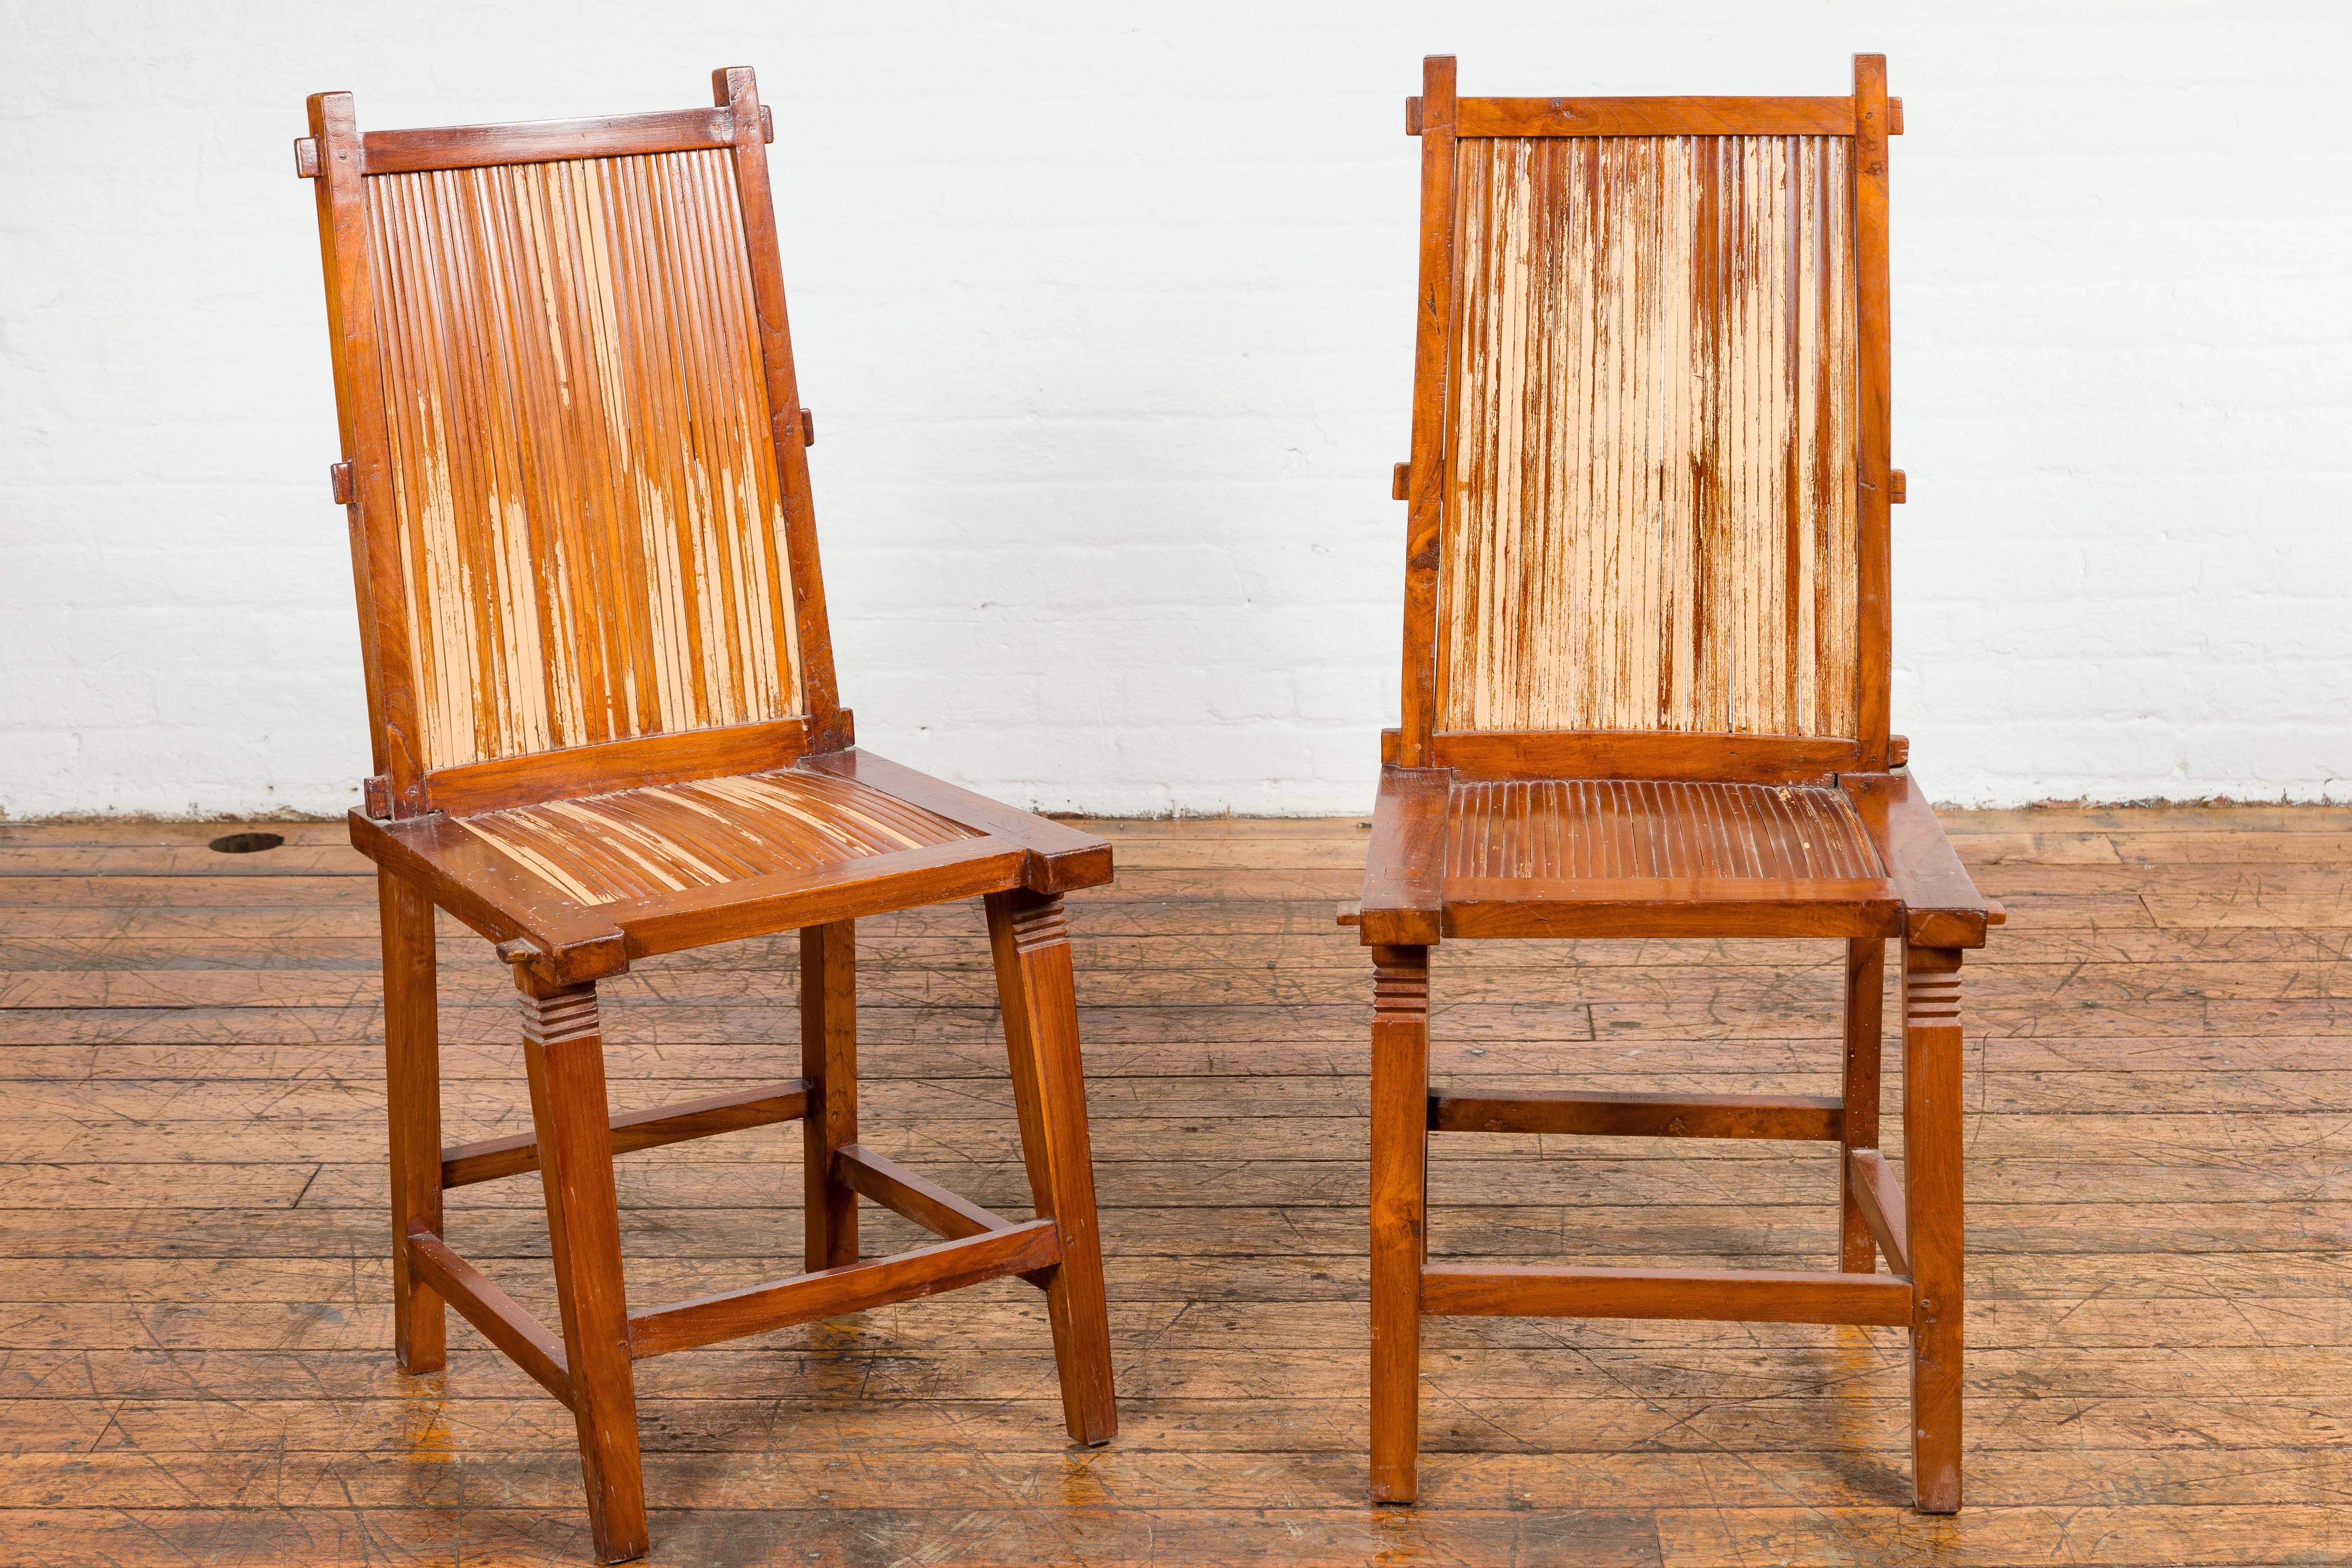 A pair of vintage side chairs from the mid 20th century with bamboo slats, tapered legs and distressed finish. This pair of vintage side chairs from the mid-20th century exudes rustic charm and timeless appeal. Crafted with a masterful blend of